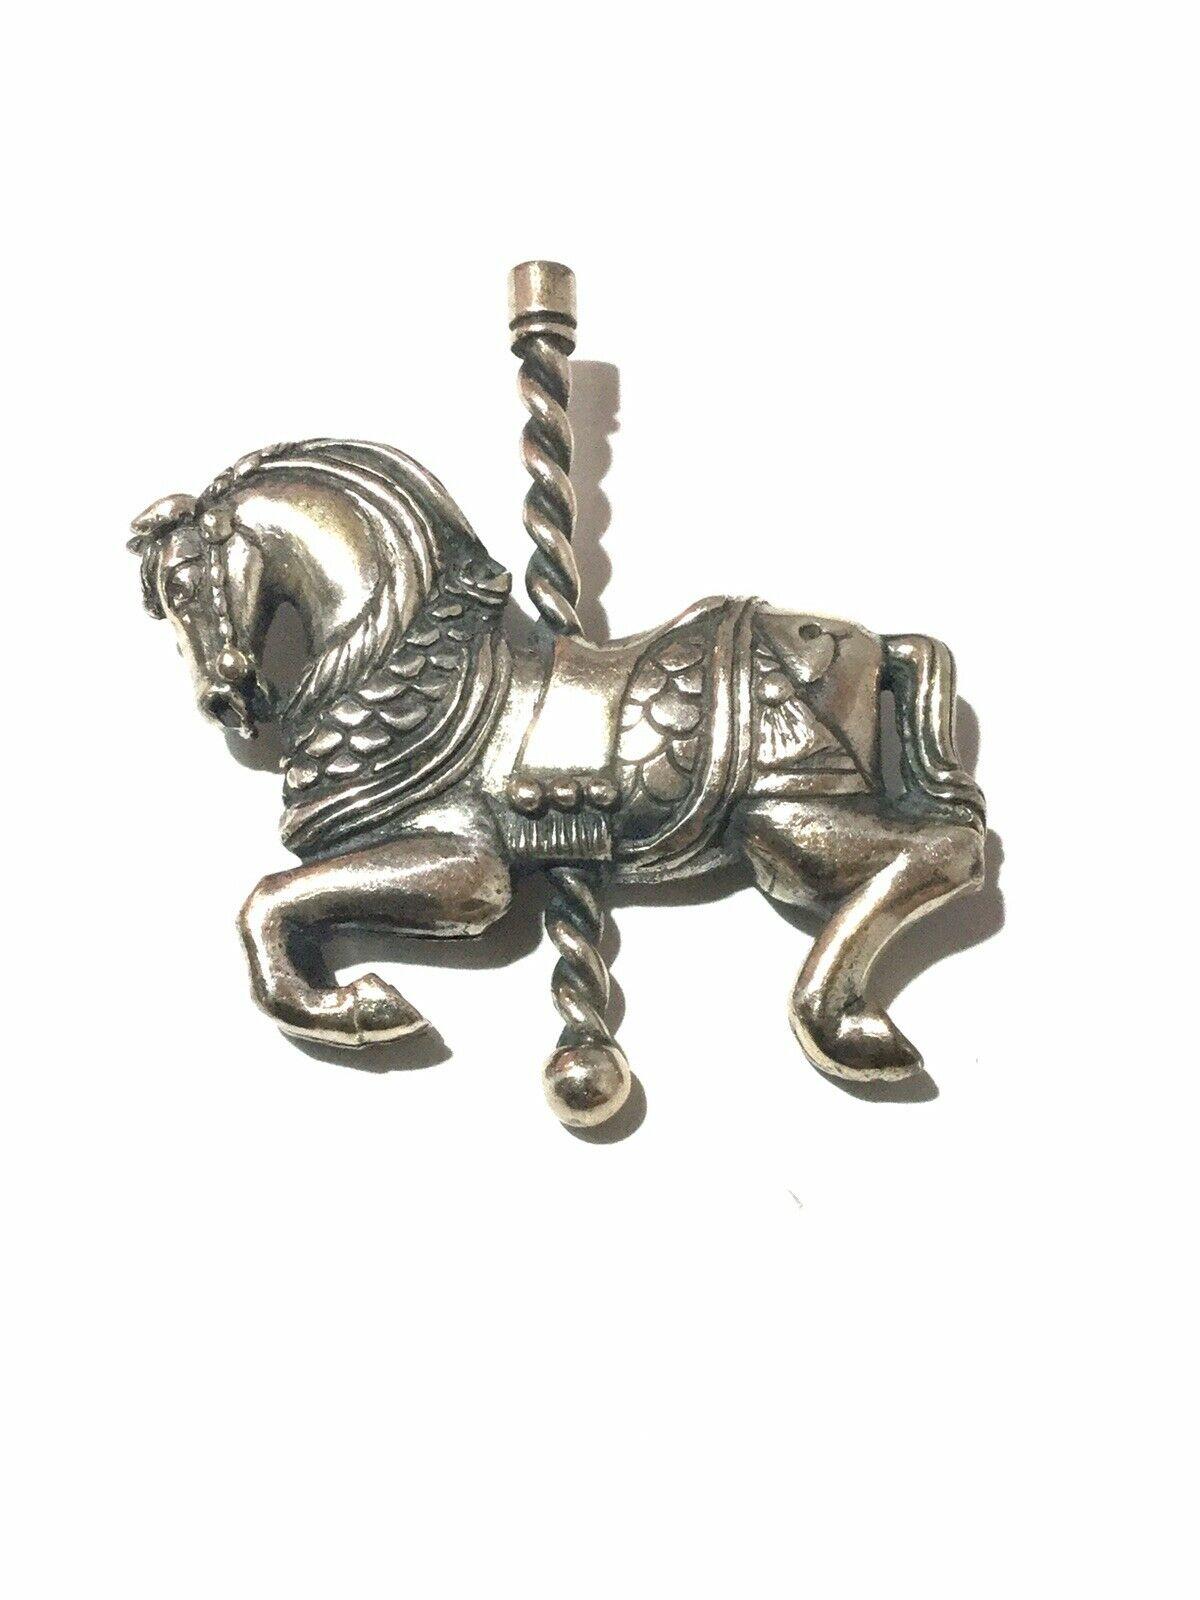 James Avery Sterling Silver Carousel Horse Pin

Featured is an adorable sterling silver carousel horse pin designed by James Avery.

Measurements:  Pin measures:  Length 1 3/4